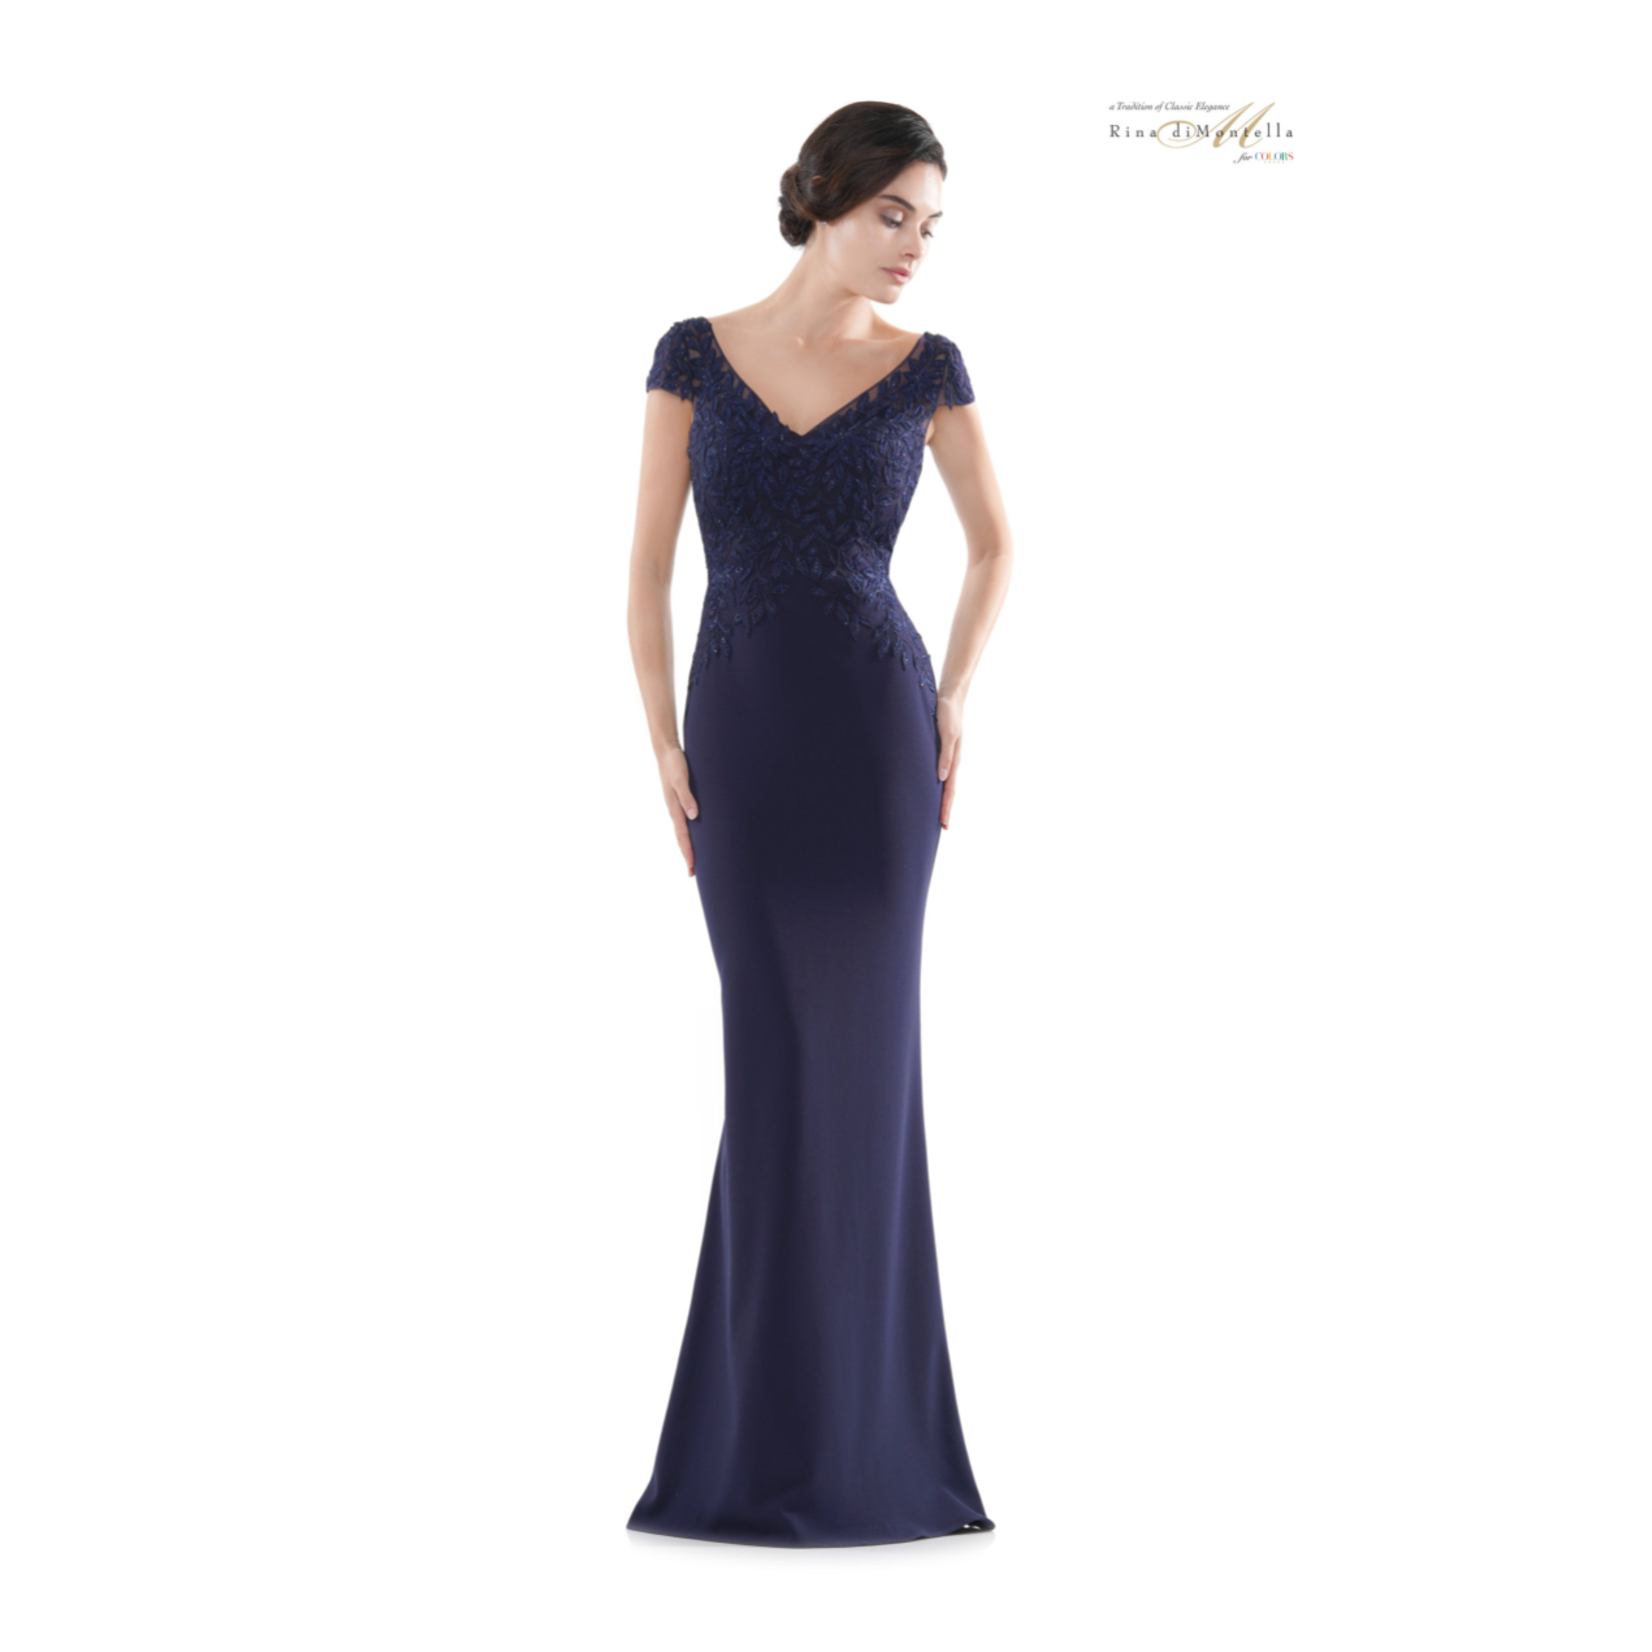 Rina di Montella Colors RD2718 Short Sleeve Stretch Faille Gown